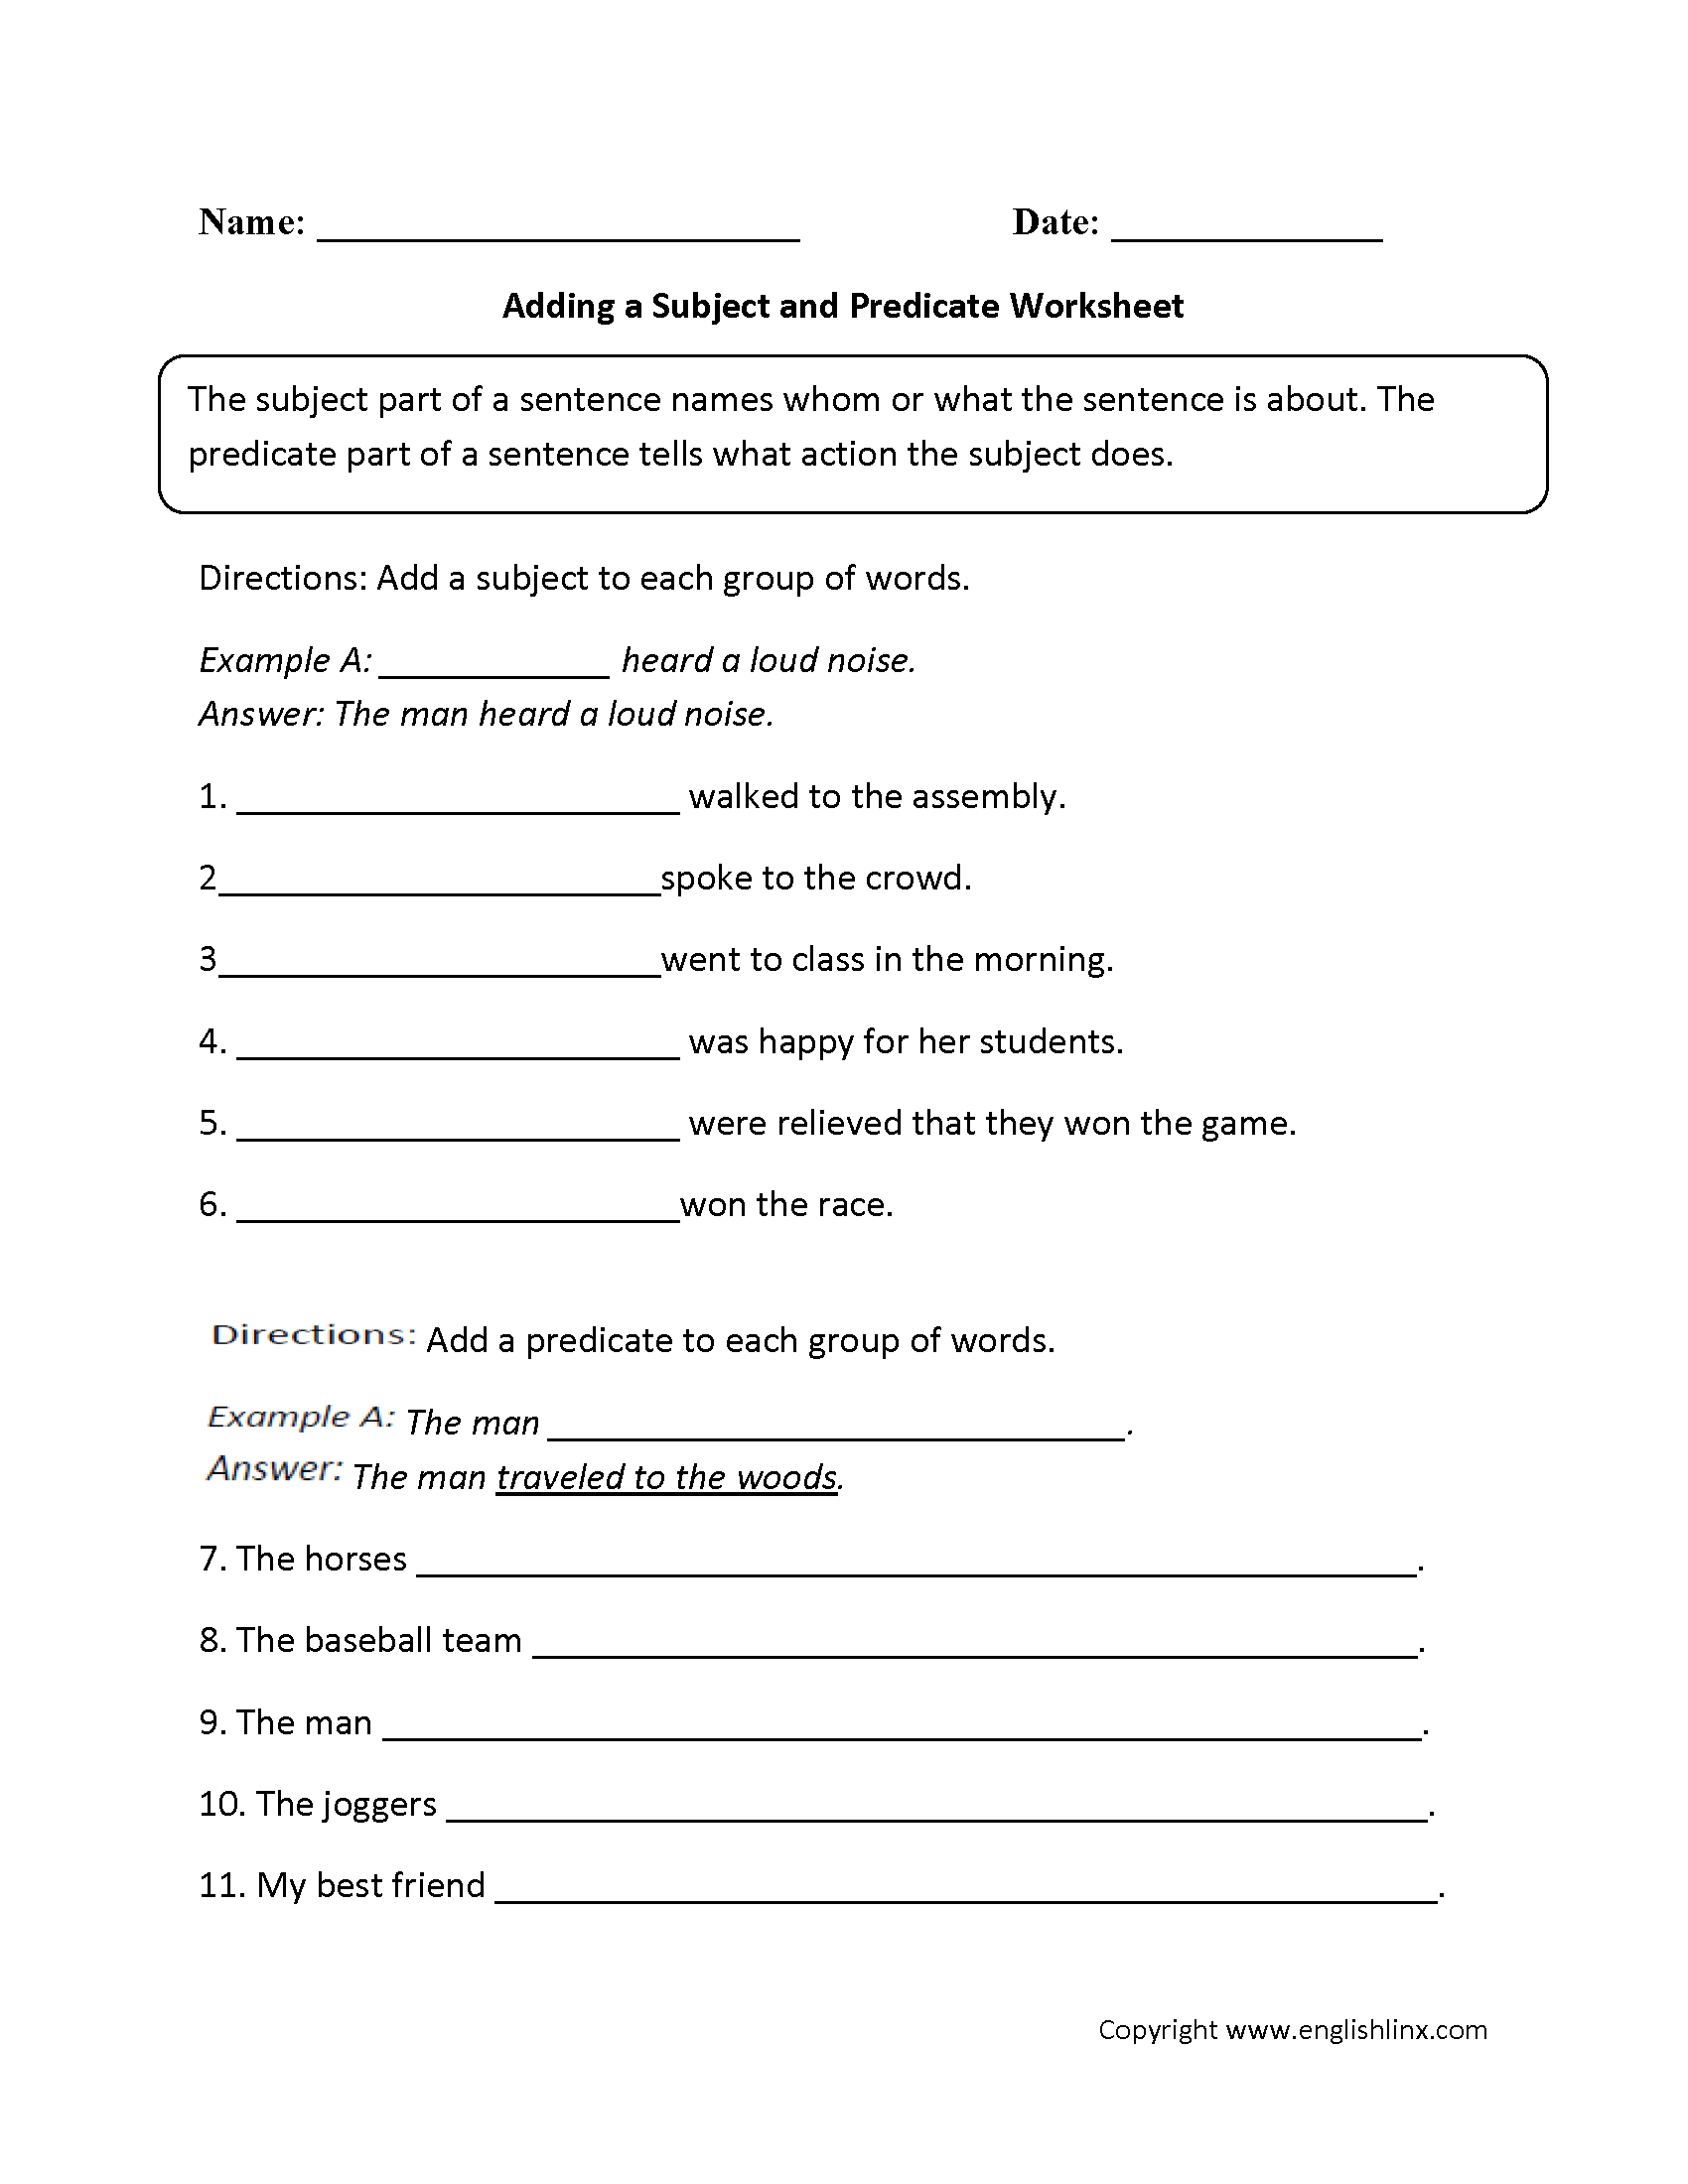 Adding A Subject And Predicate Worksheet | Rti Ela Middle School - Free Printable Subject Predicate Worksheets 2Nd Grade